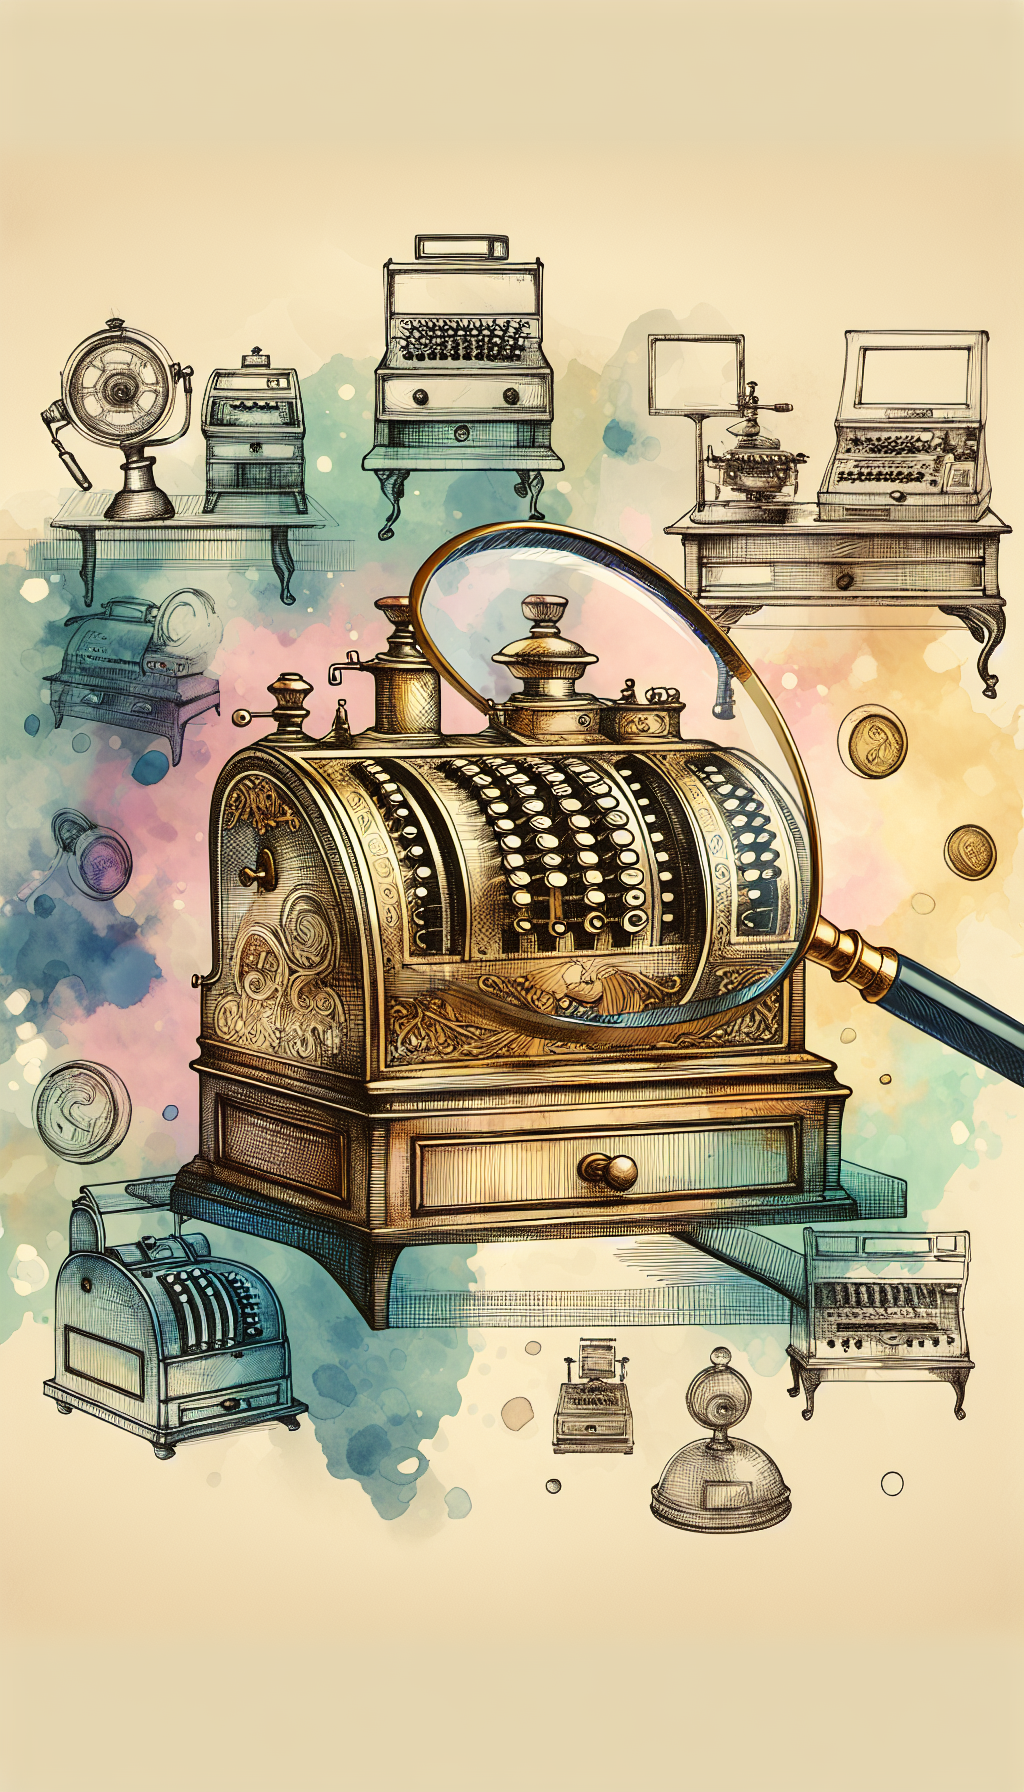 In a whimsical fusion of line art and watercolor, an ancient, ornate cash register sits atop a pedestal, its brass details gleaming against a soft-hued backdrop. Around it, ghostly outlines of rarer models and unique features float like treasures, with price tags depicting their collectibility. A magnifying glass highlights the intricate craftsmanship that underpins their desirability.